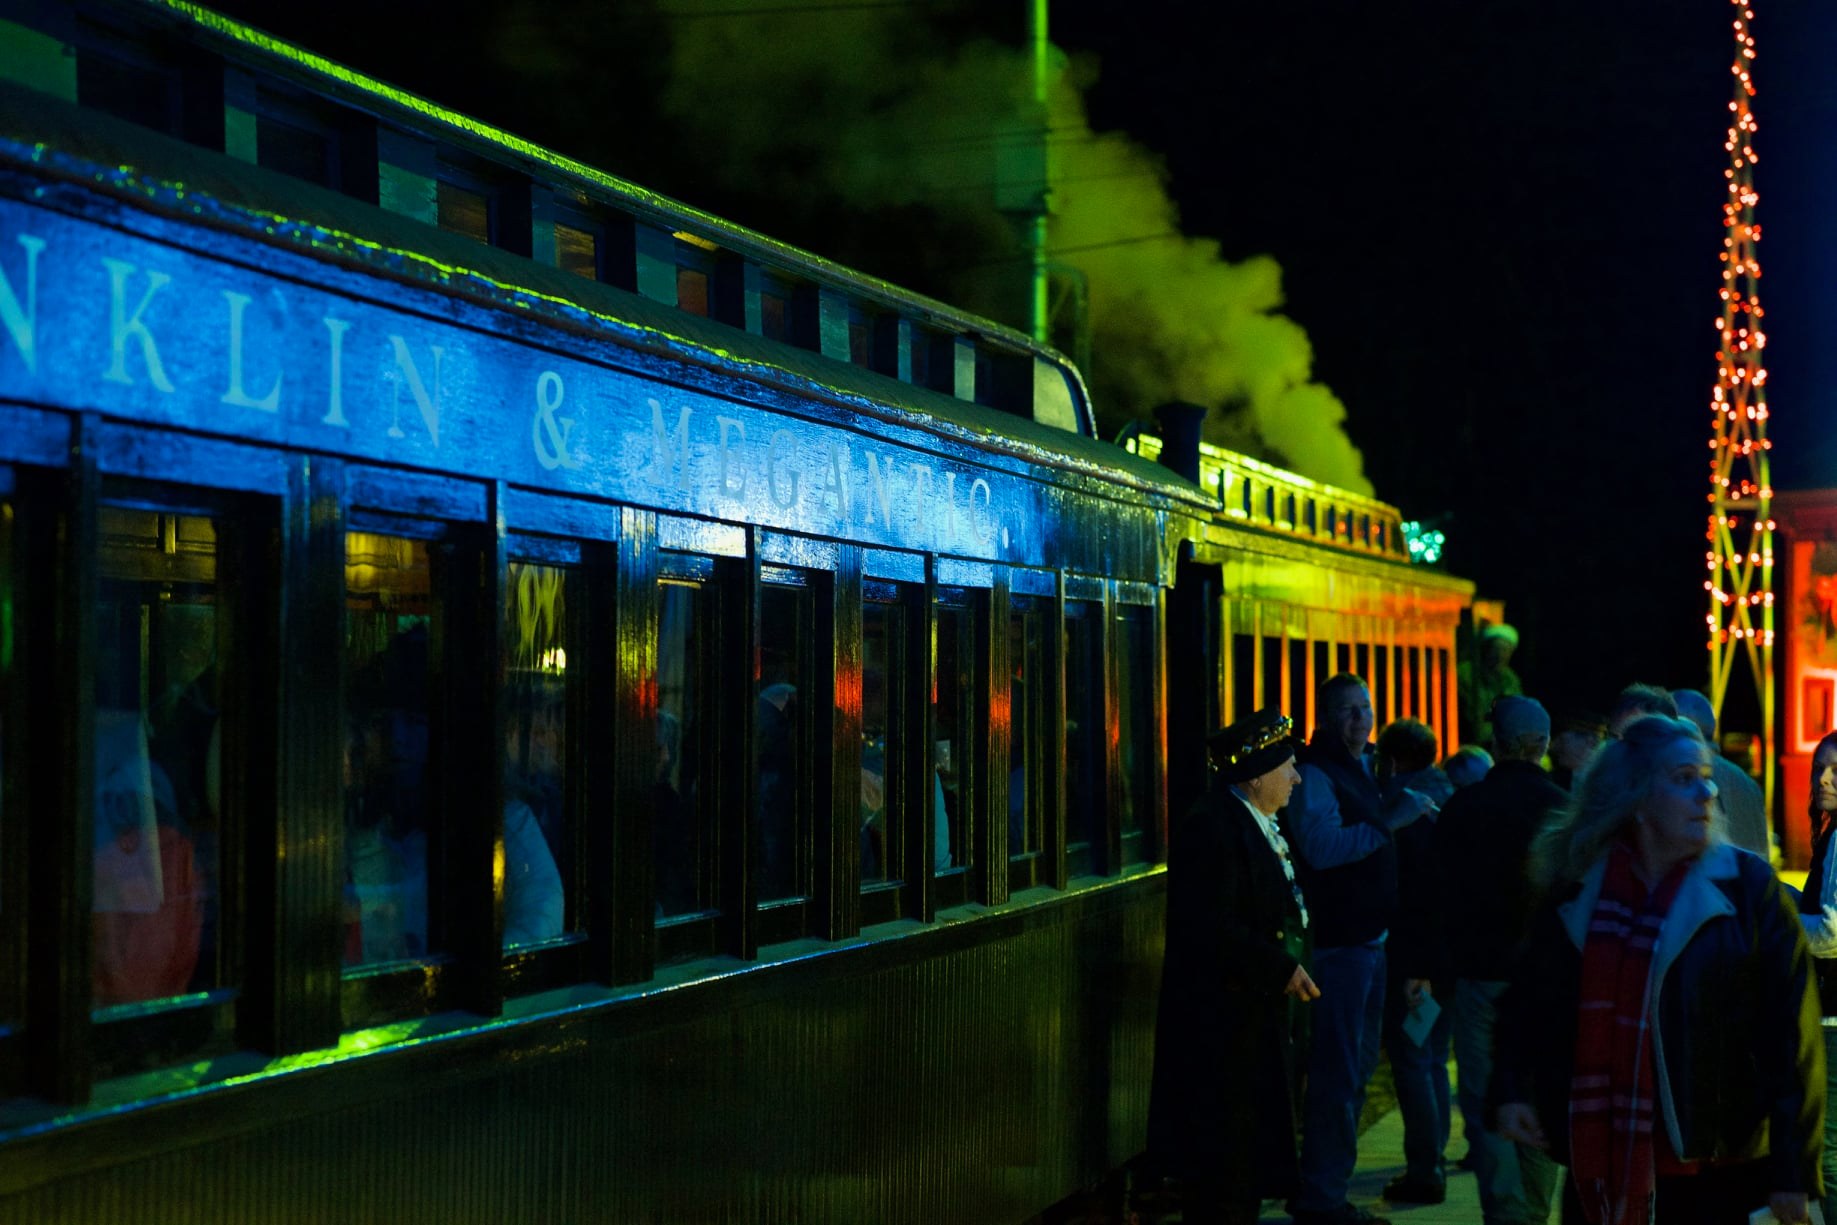 This Christmas Train Ride In Maine Is Like A Hallmark Movie